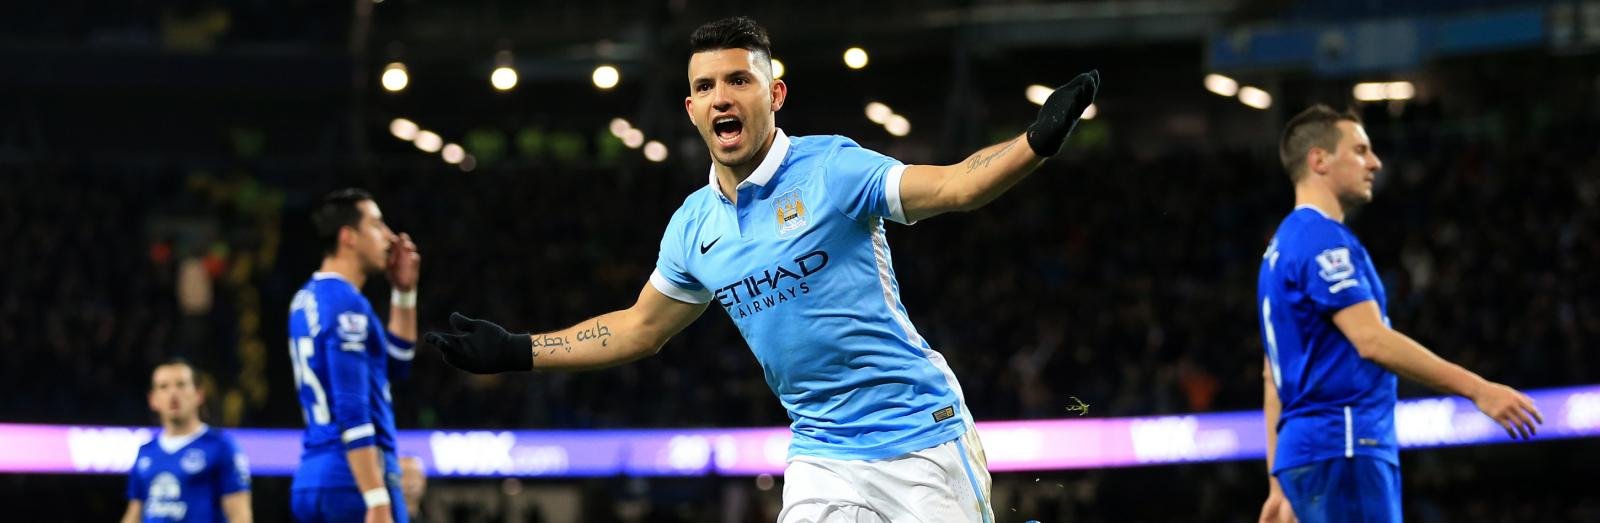 Round-Up: Capital One Cup – Man City topple Everton in controversial thriller